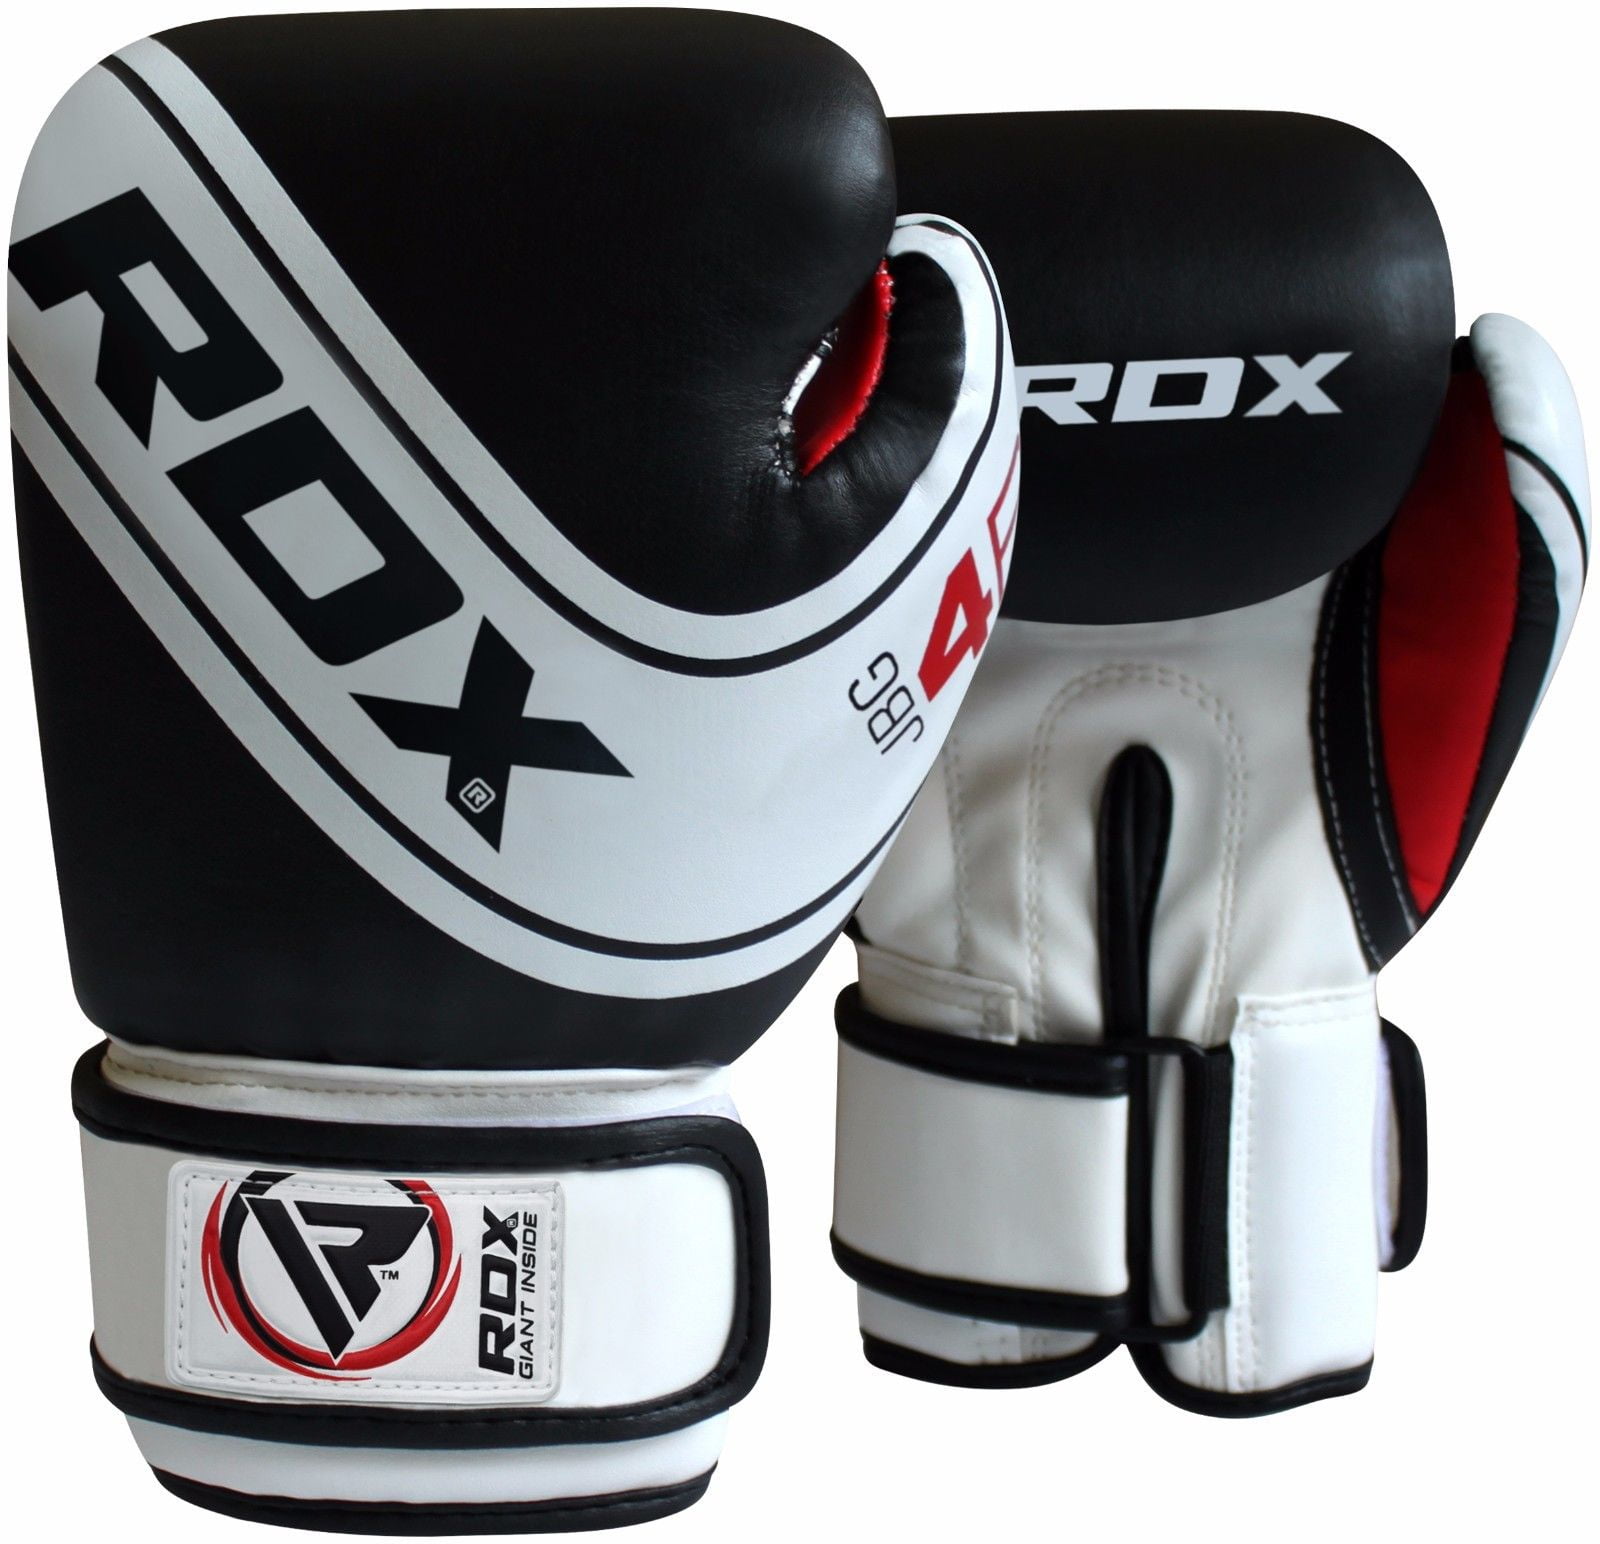 Maya Hide Leather Junior 4oz Good for Youth Punch Bag RDX Kids Boxing Gloves for Training Kickboxing 6oz Mitts for Sparring Fighting Muay Thai Grappling Dummy and Focus Pads Punching 